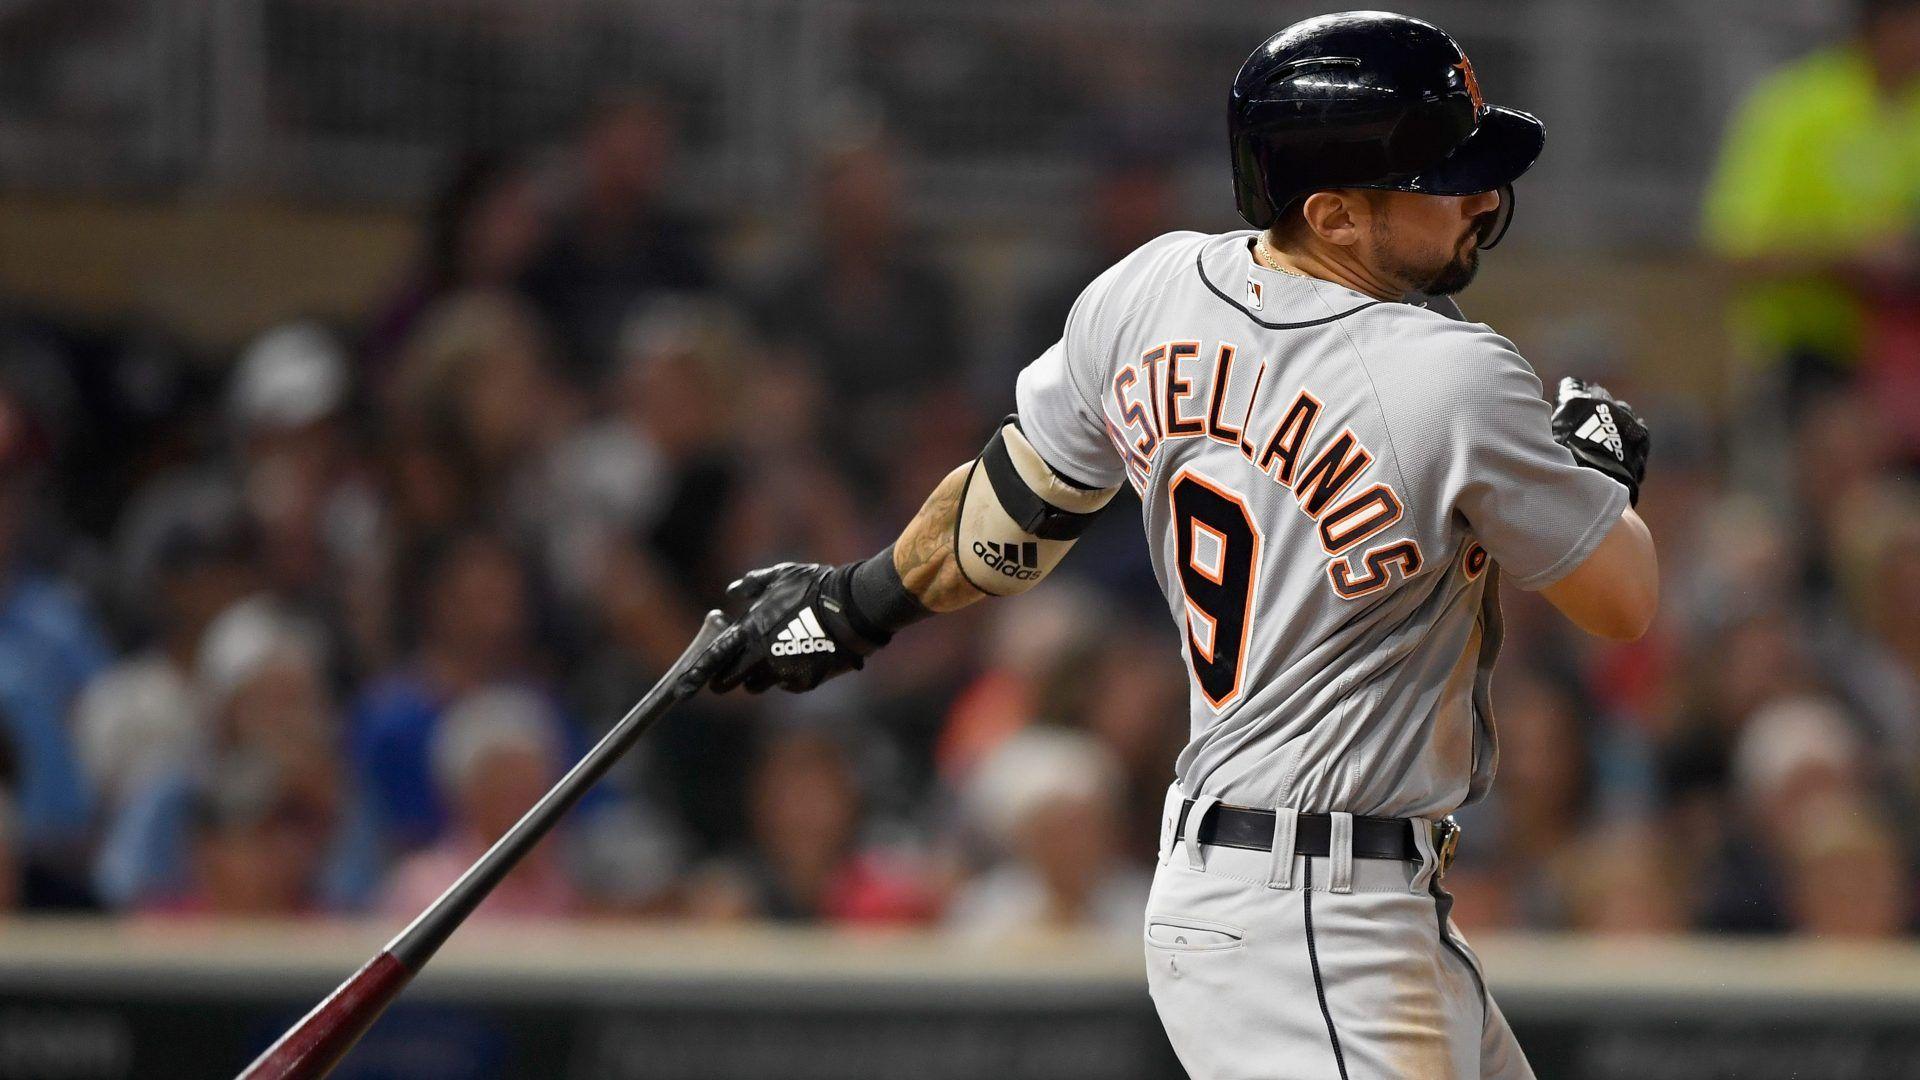 Report: Nicholas Castellanos wants to be traded before spring training